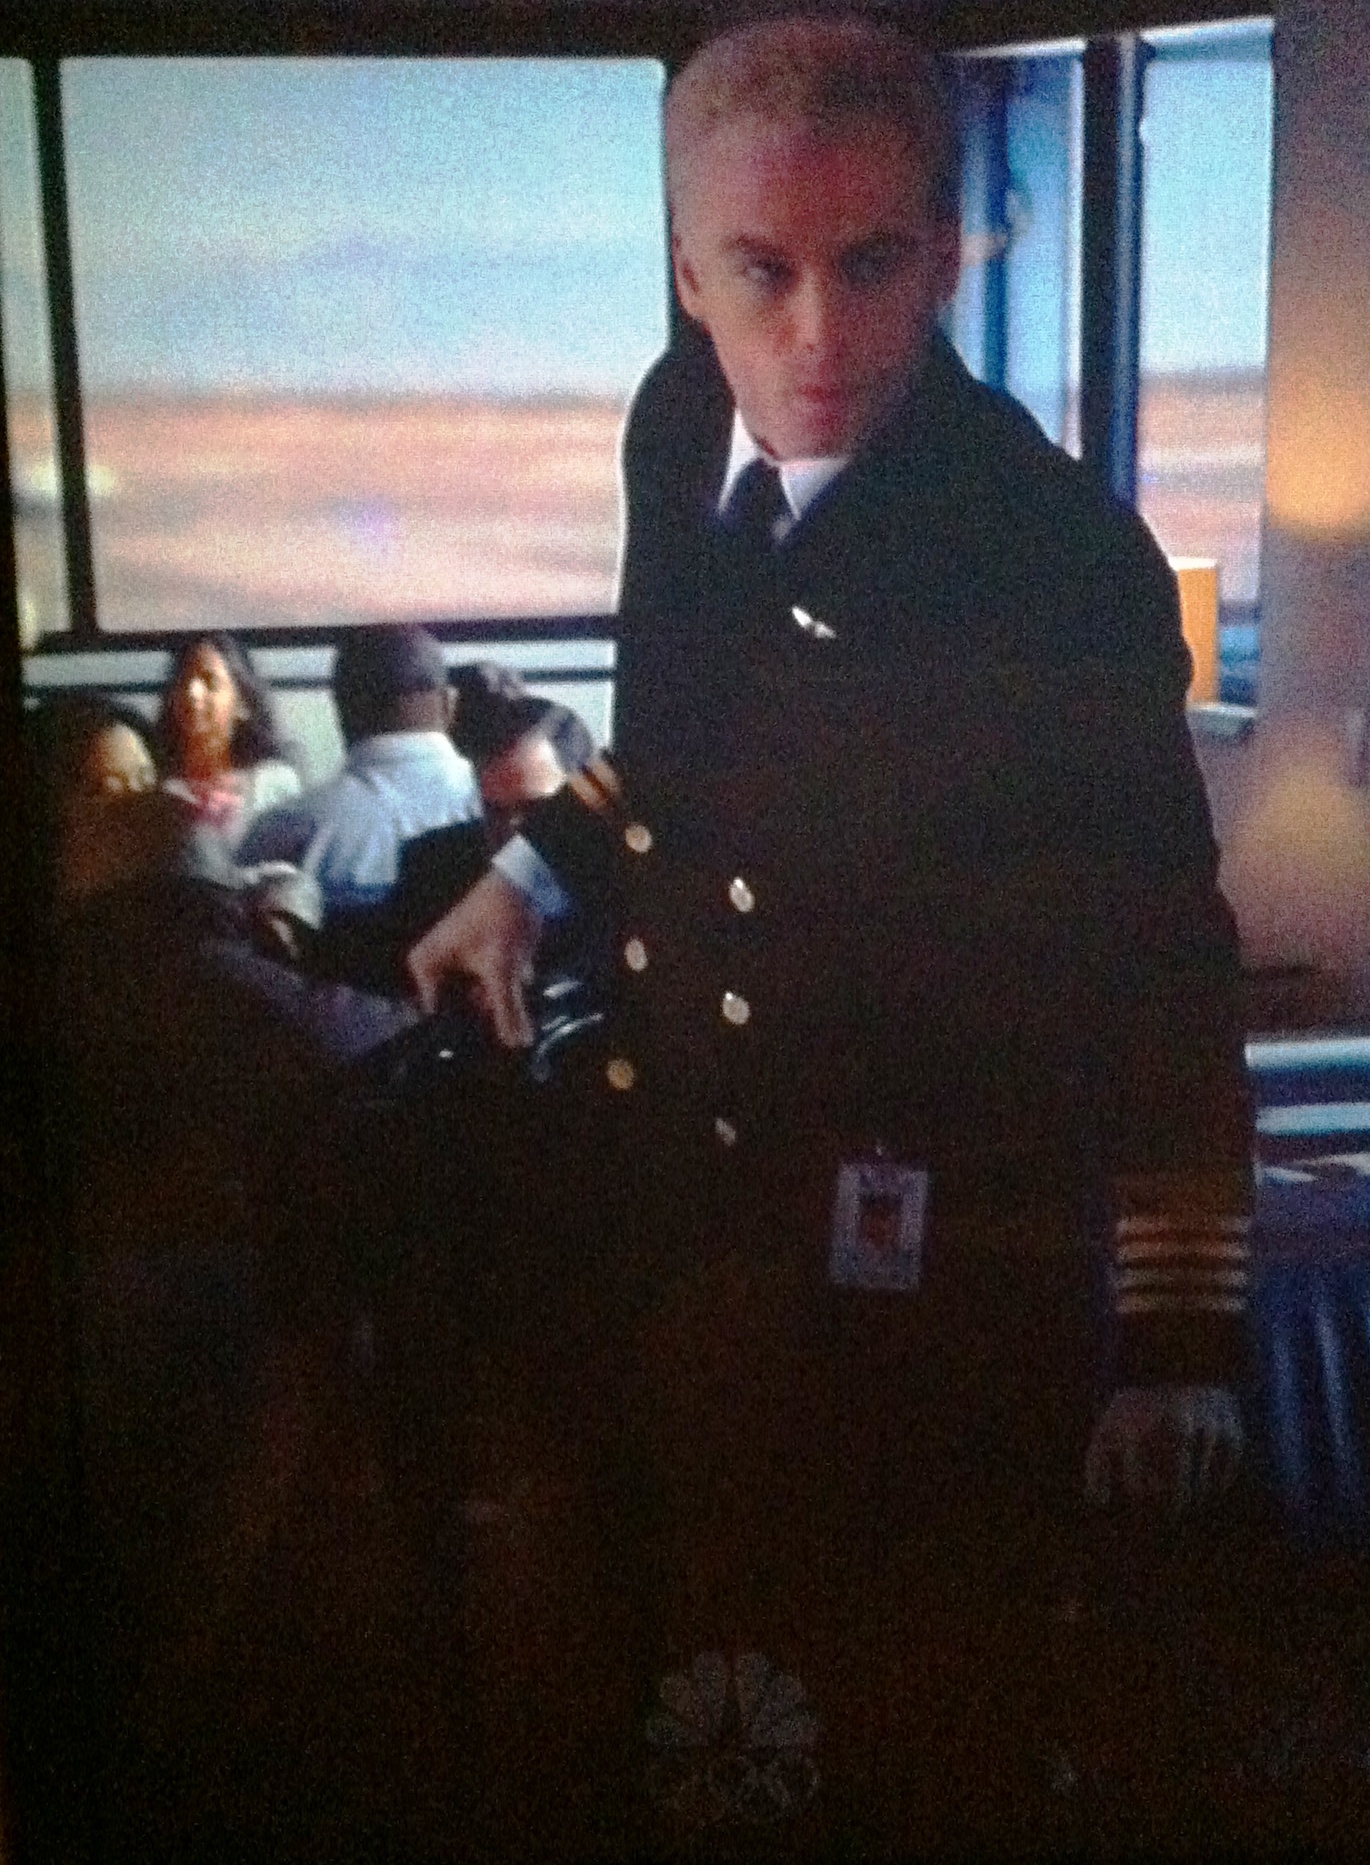 The Blacklist - Chetna Goel as an airline passenger. Aired on NBC on 11/11/13.